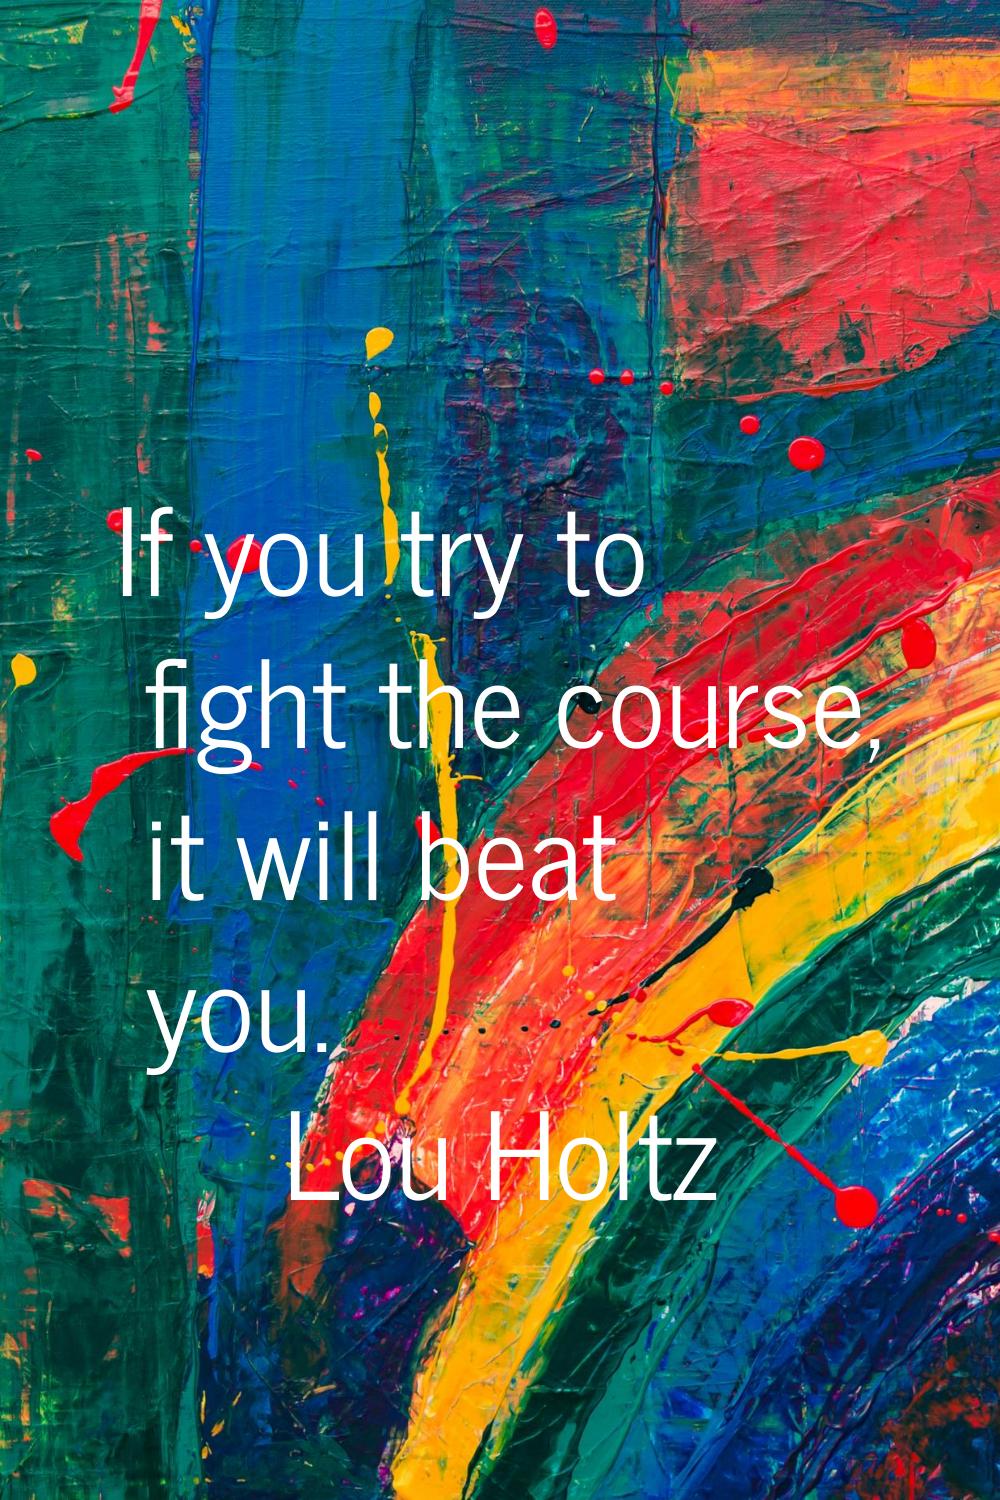 If you try to fight the course, it will beat you.